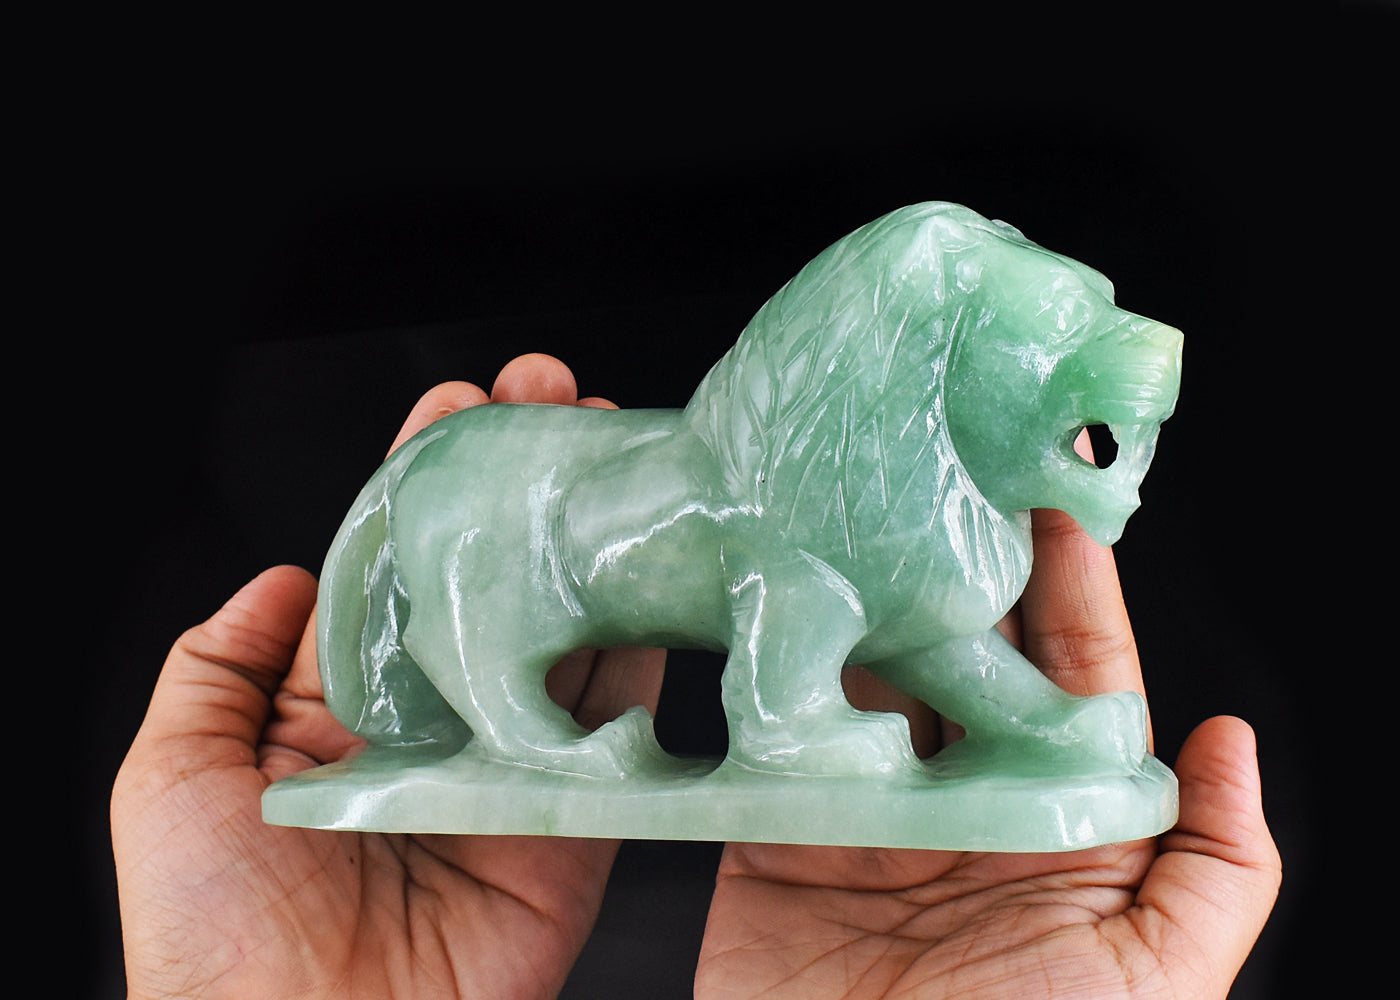 Artisian 4590.00 Cts Genuine Green Aventurine Hand Carved Crystal Gemstone Carving Lion